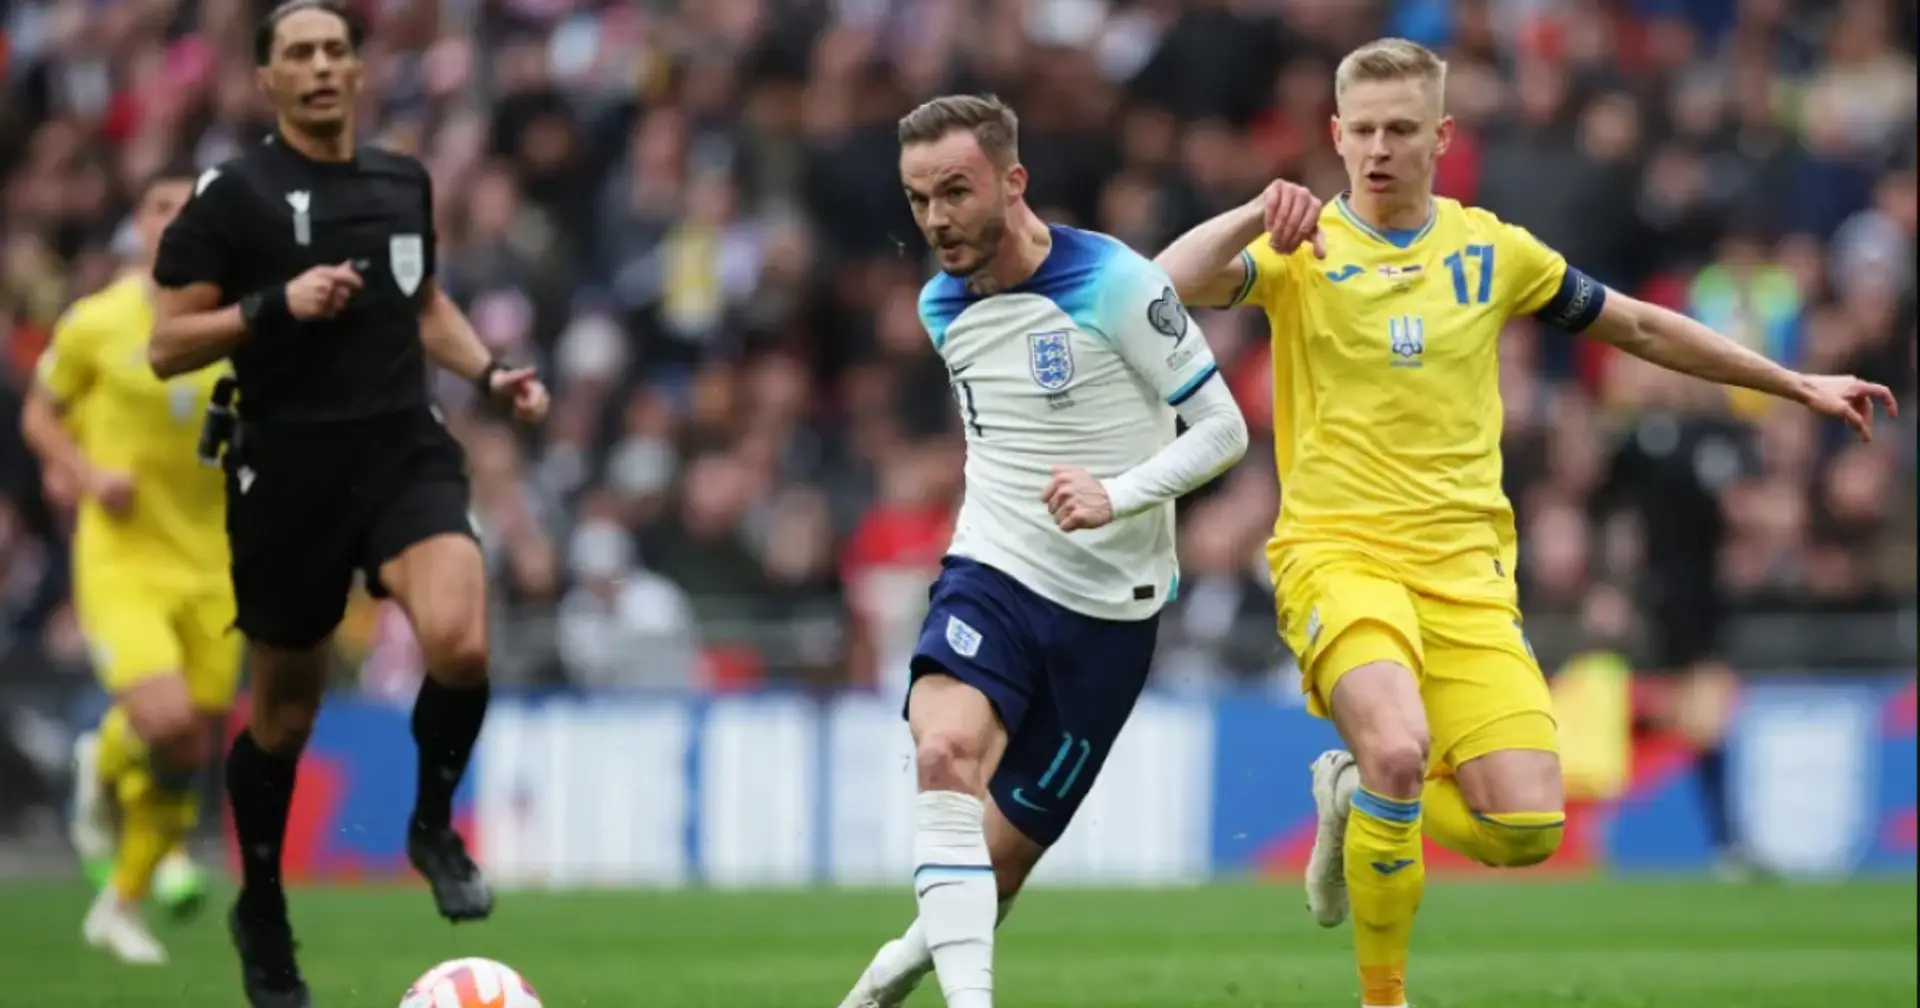 'He was awful in the game': Fans react to James Maddison's performance against Ukraine